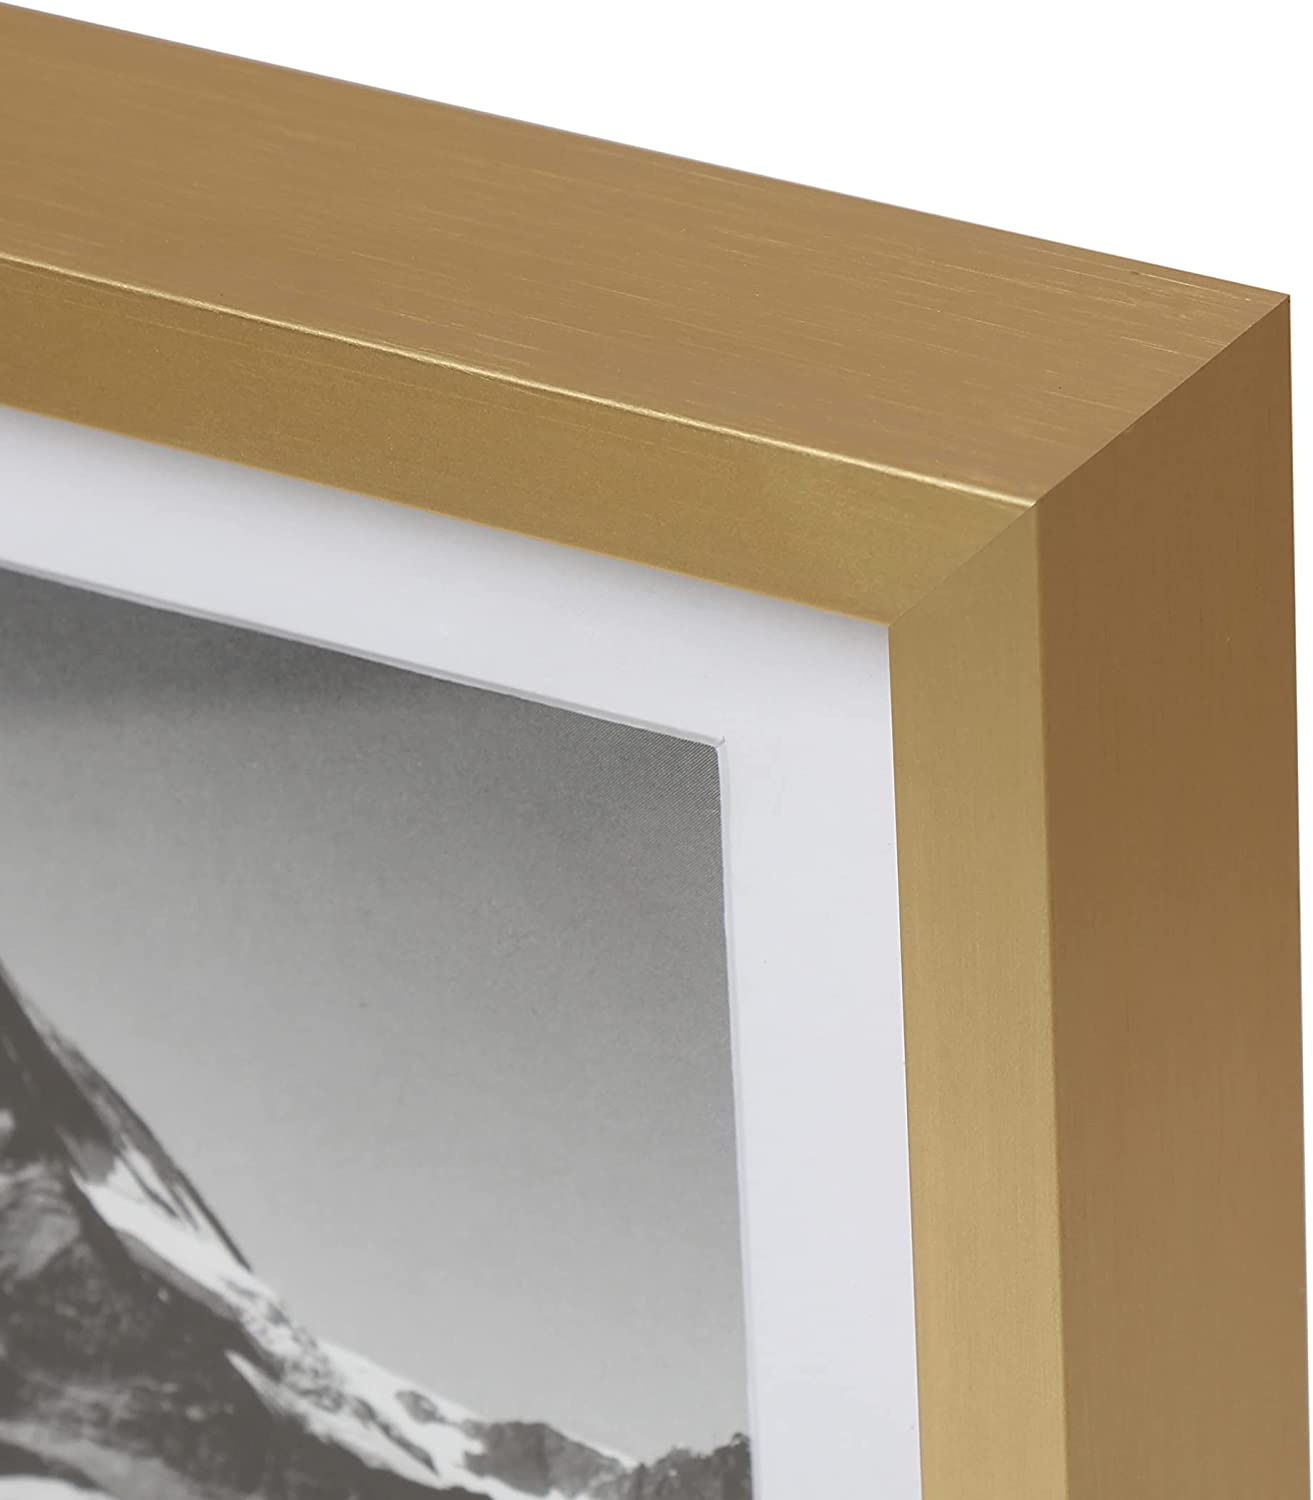 11" x 17" Deluxe Brass Gold Aluminum Contemporary Picture Frame with Tempered Glass